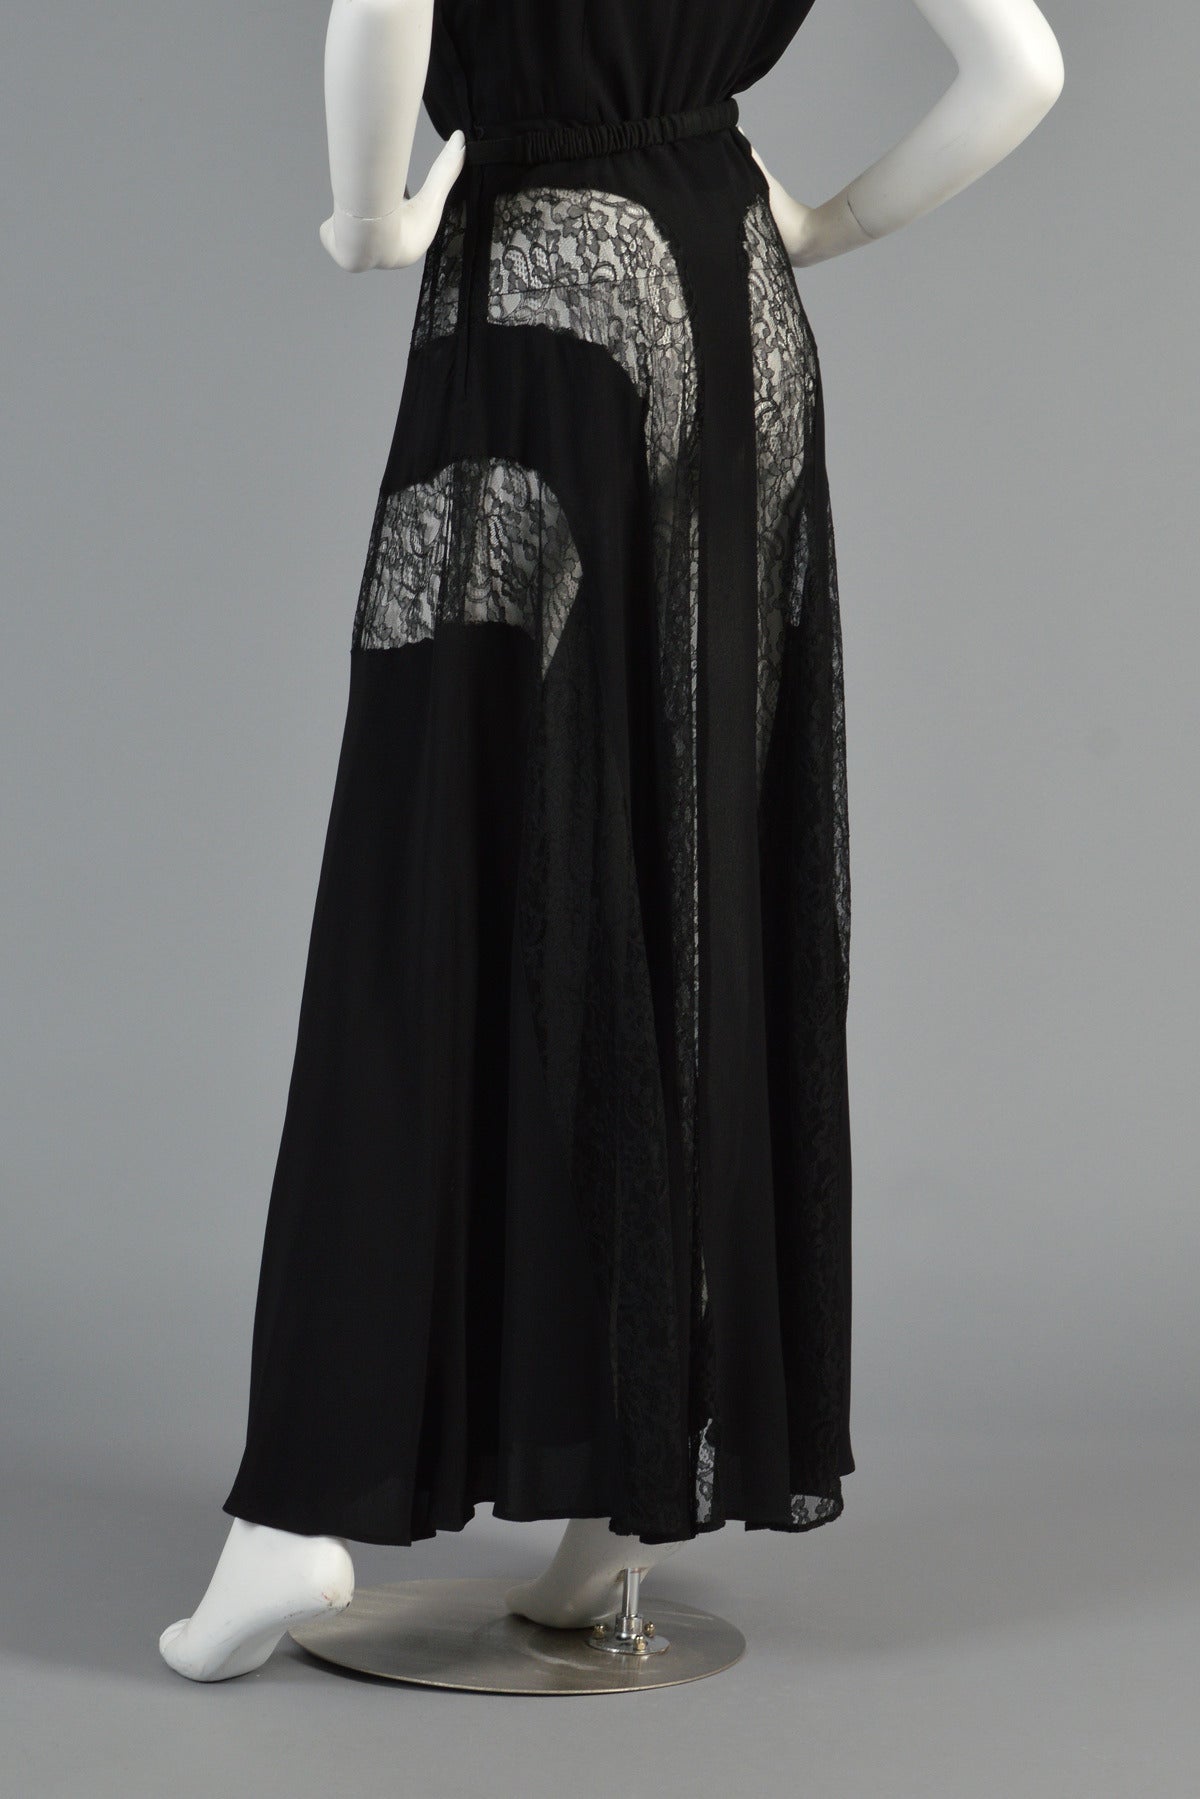 1940s Black Rayon Crepe + Lace Insert Panel Evening Gown For Sale 3